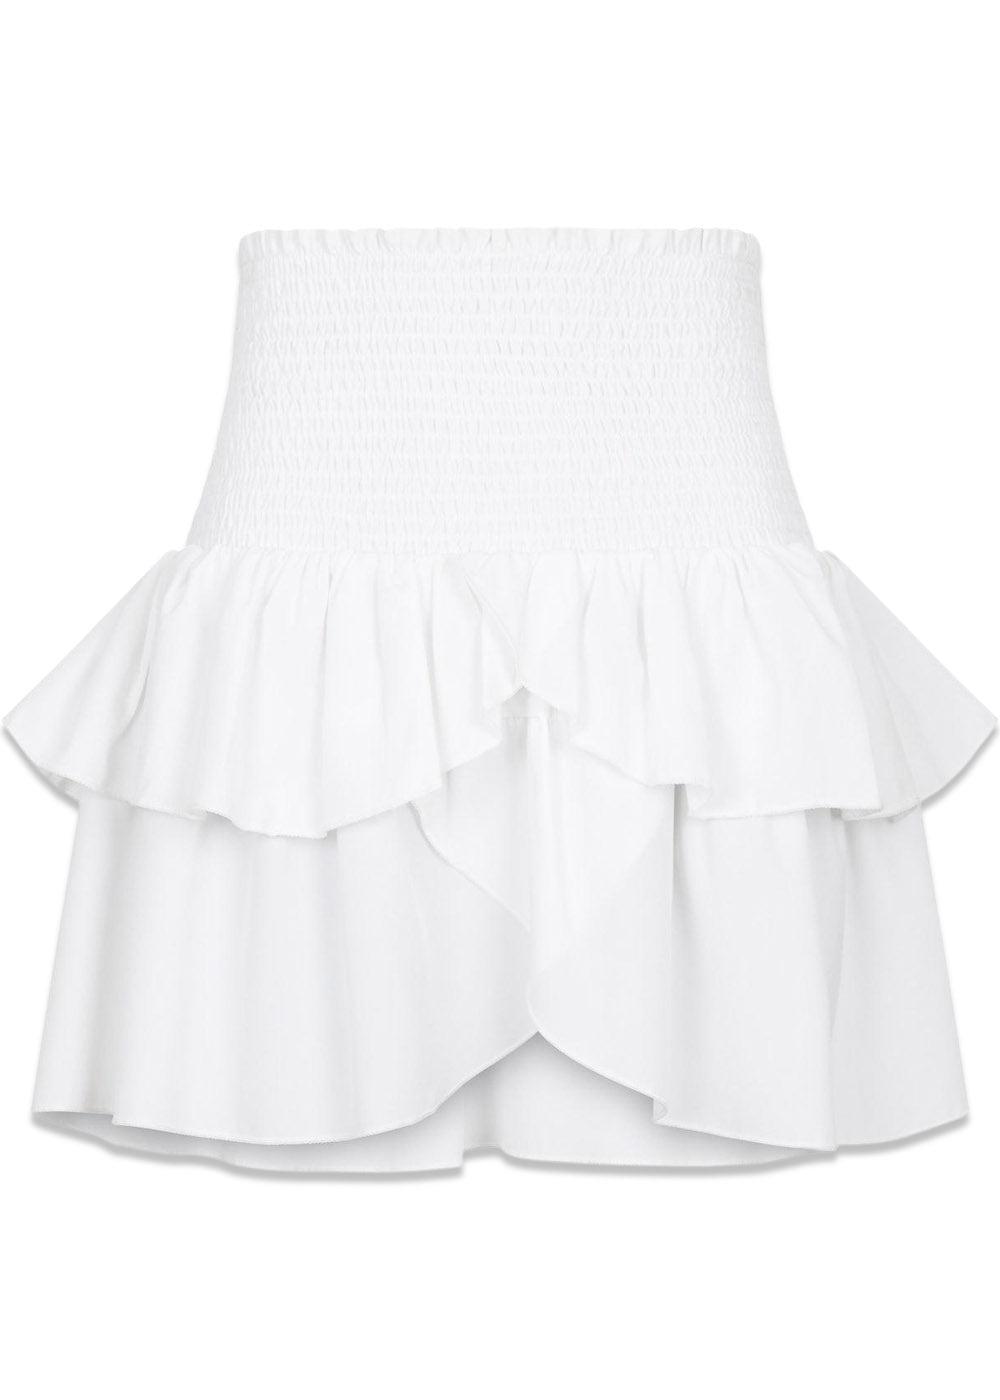 Neo Noirs Carin R Skirt - White. Køb skirts her.